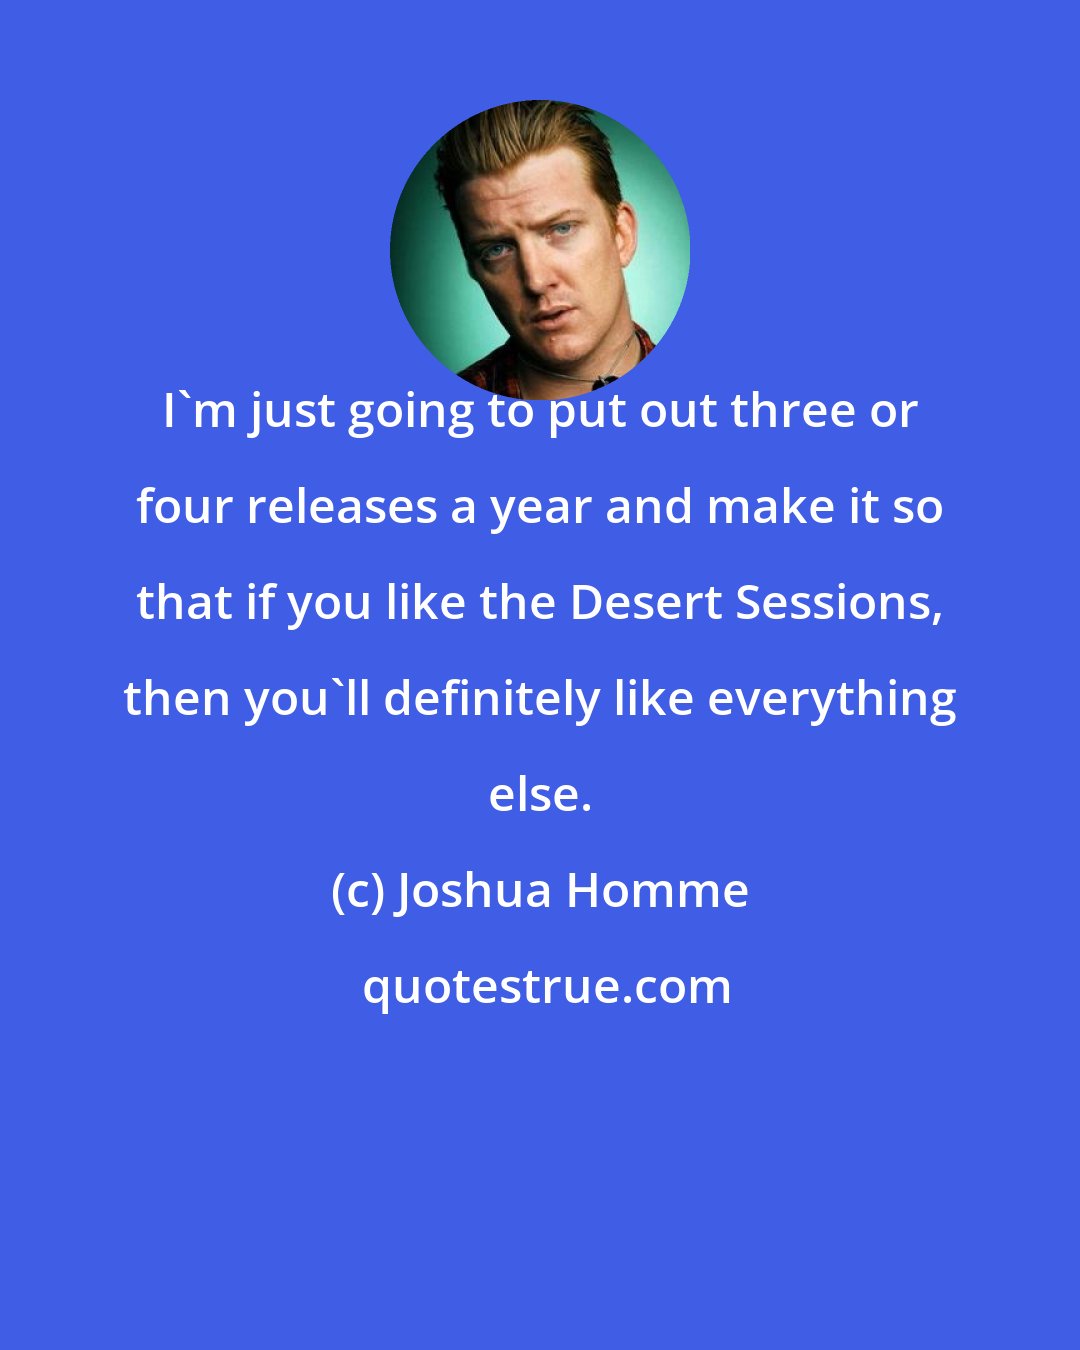 Joshua Homme: I'm just going to put out three or four releases a year and make it so that if you like the Desert Sessions, then you'll definitely like everything else.